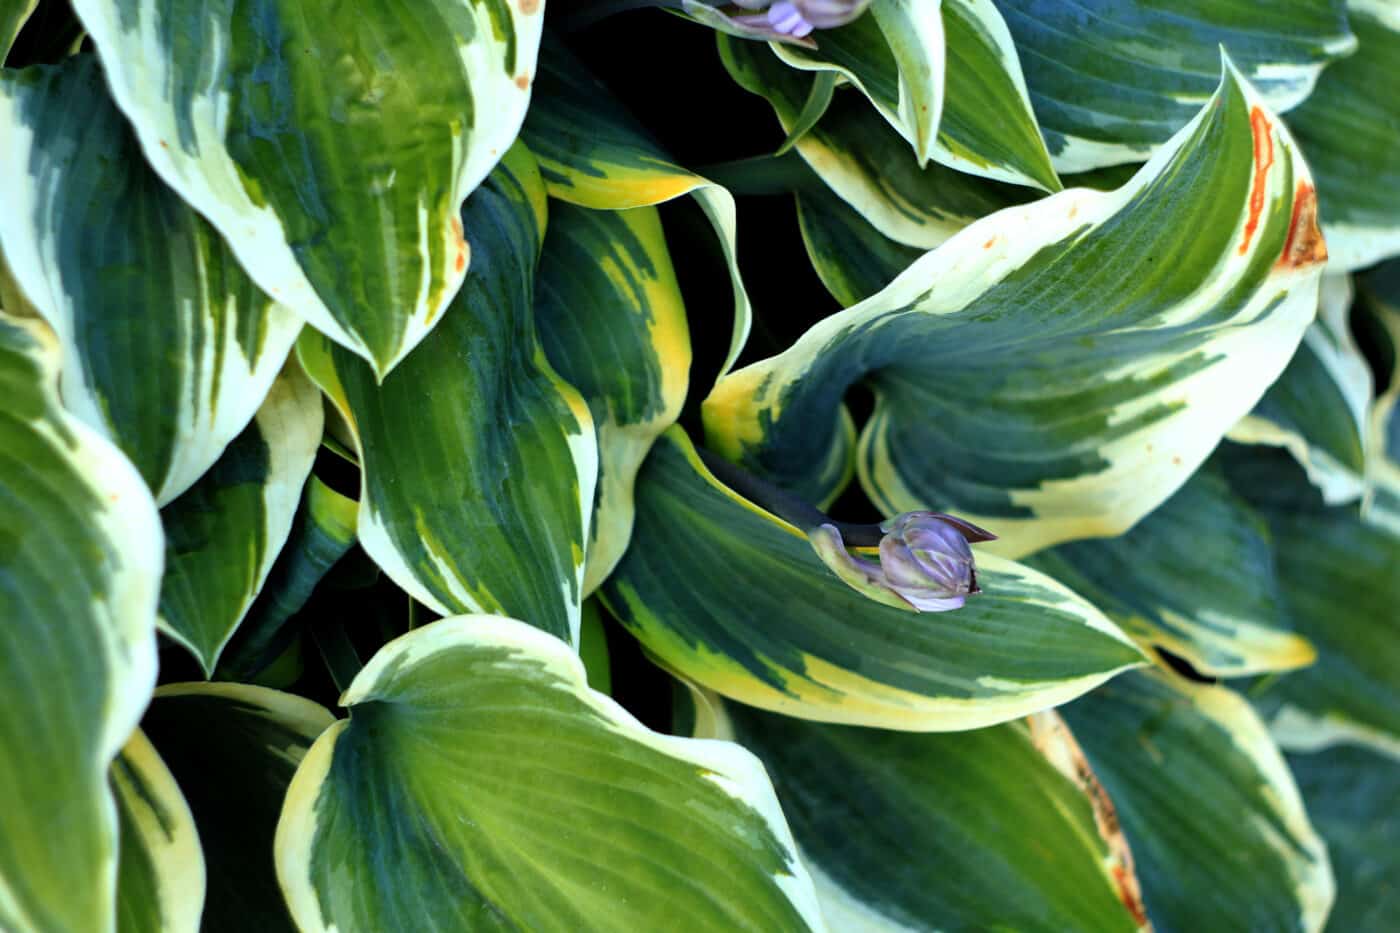 Edges of green and white leaves of hosta plants turning brown